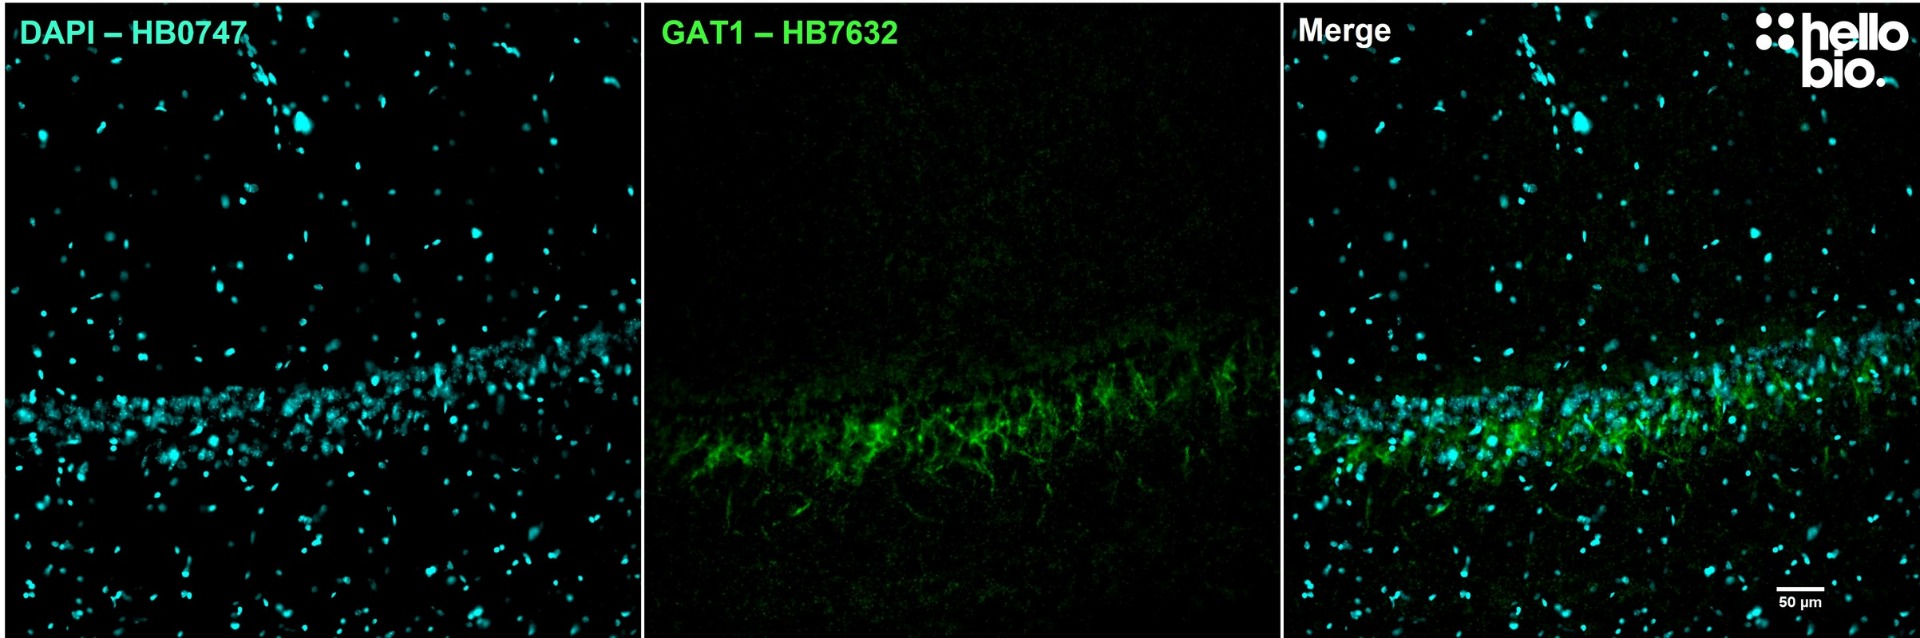 Figure 2. GAT1 staining in the GABAergic interneurons of hippocampal CA1 using HB7632.